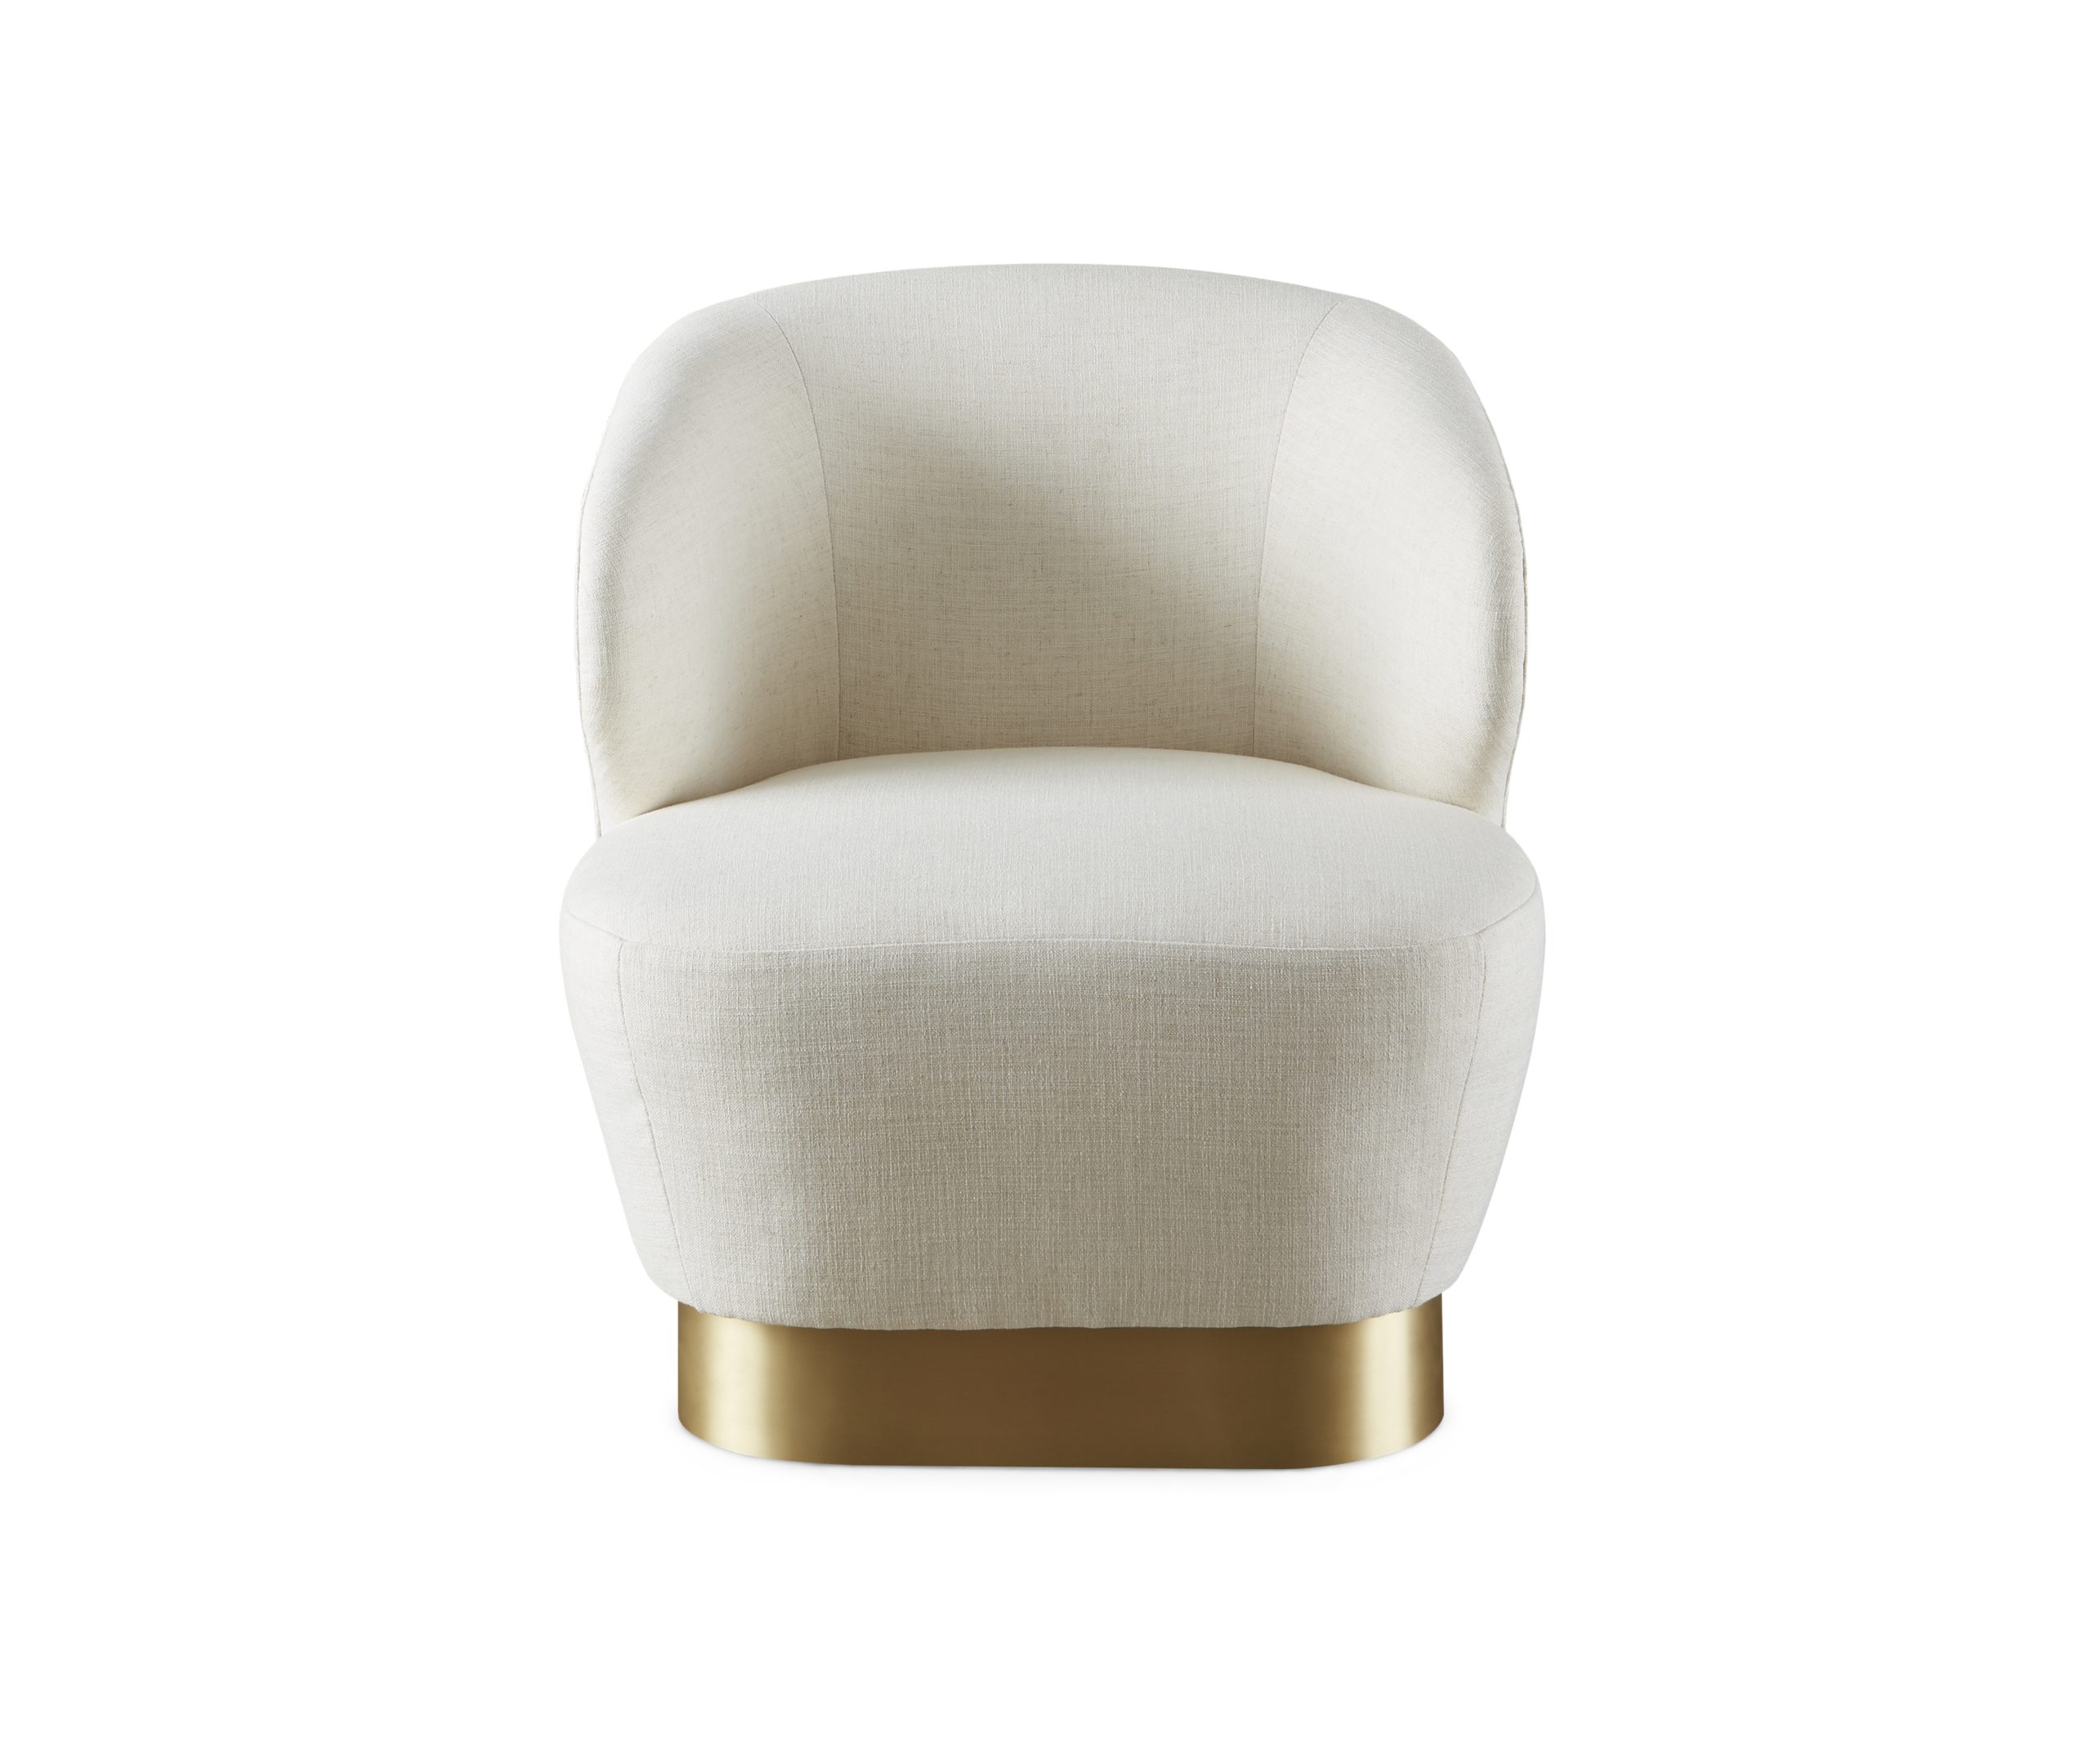 Baker_products_WNWN_lambert_swivel_chair_BAU3103c_FRONT-scaled-2